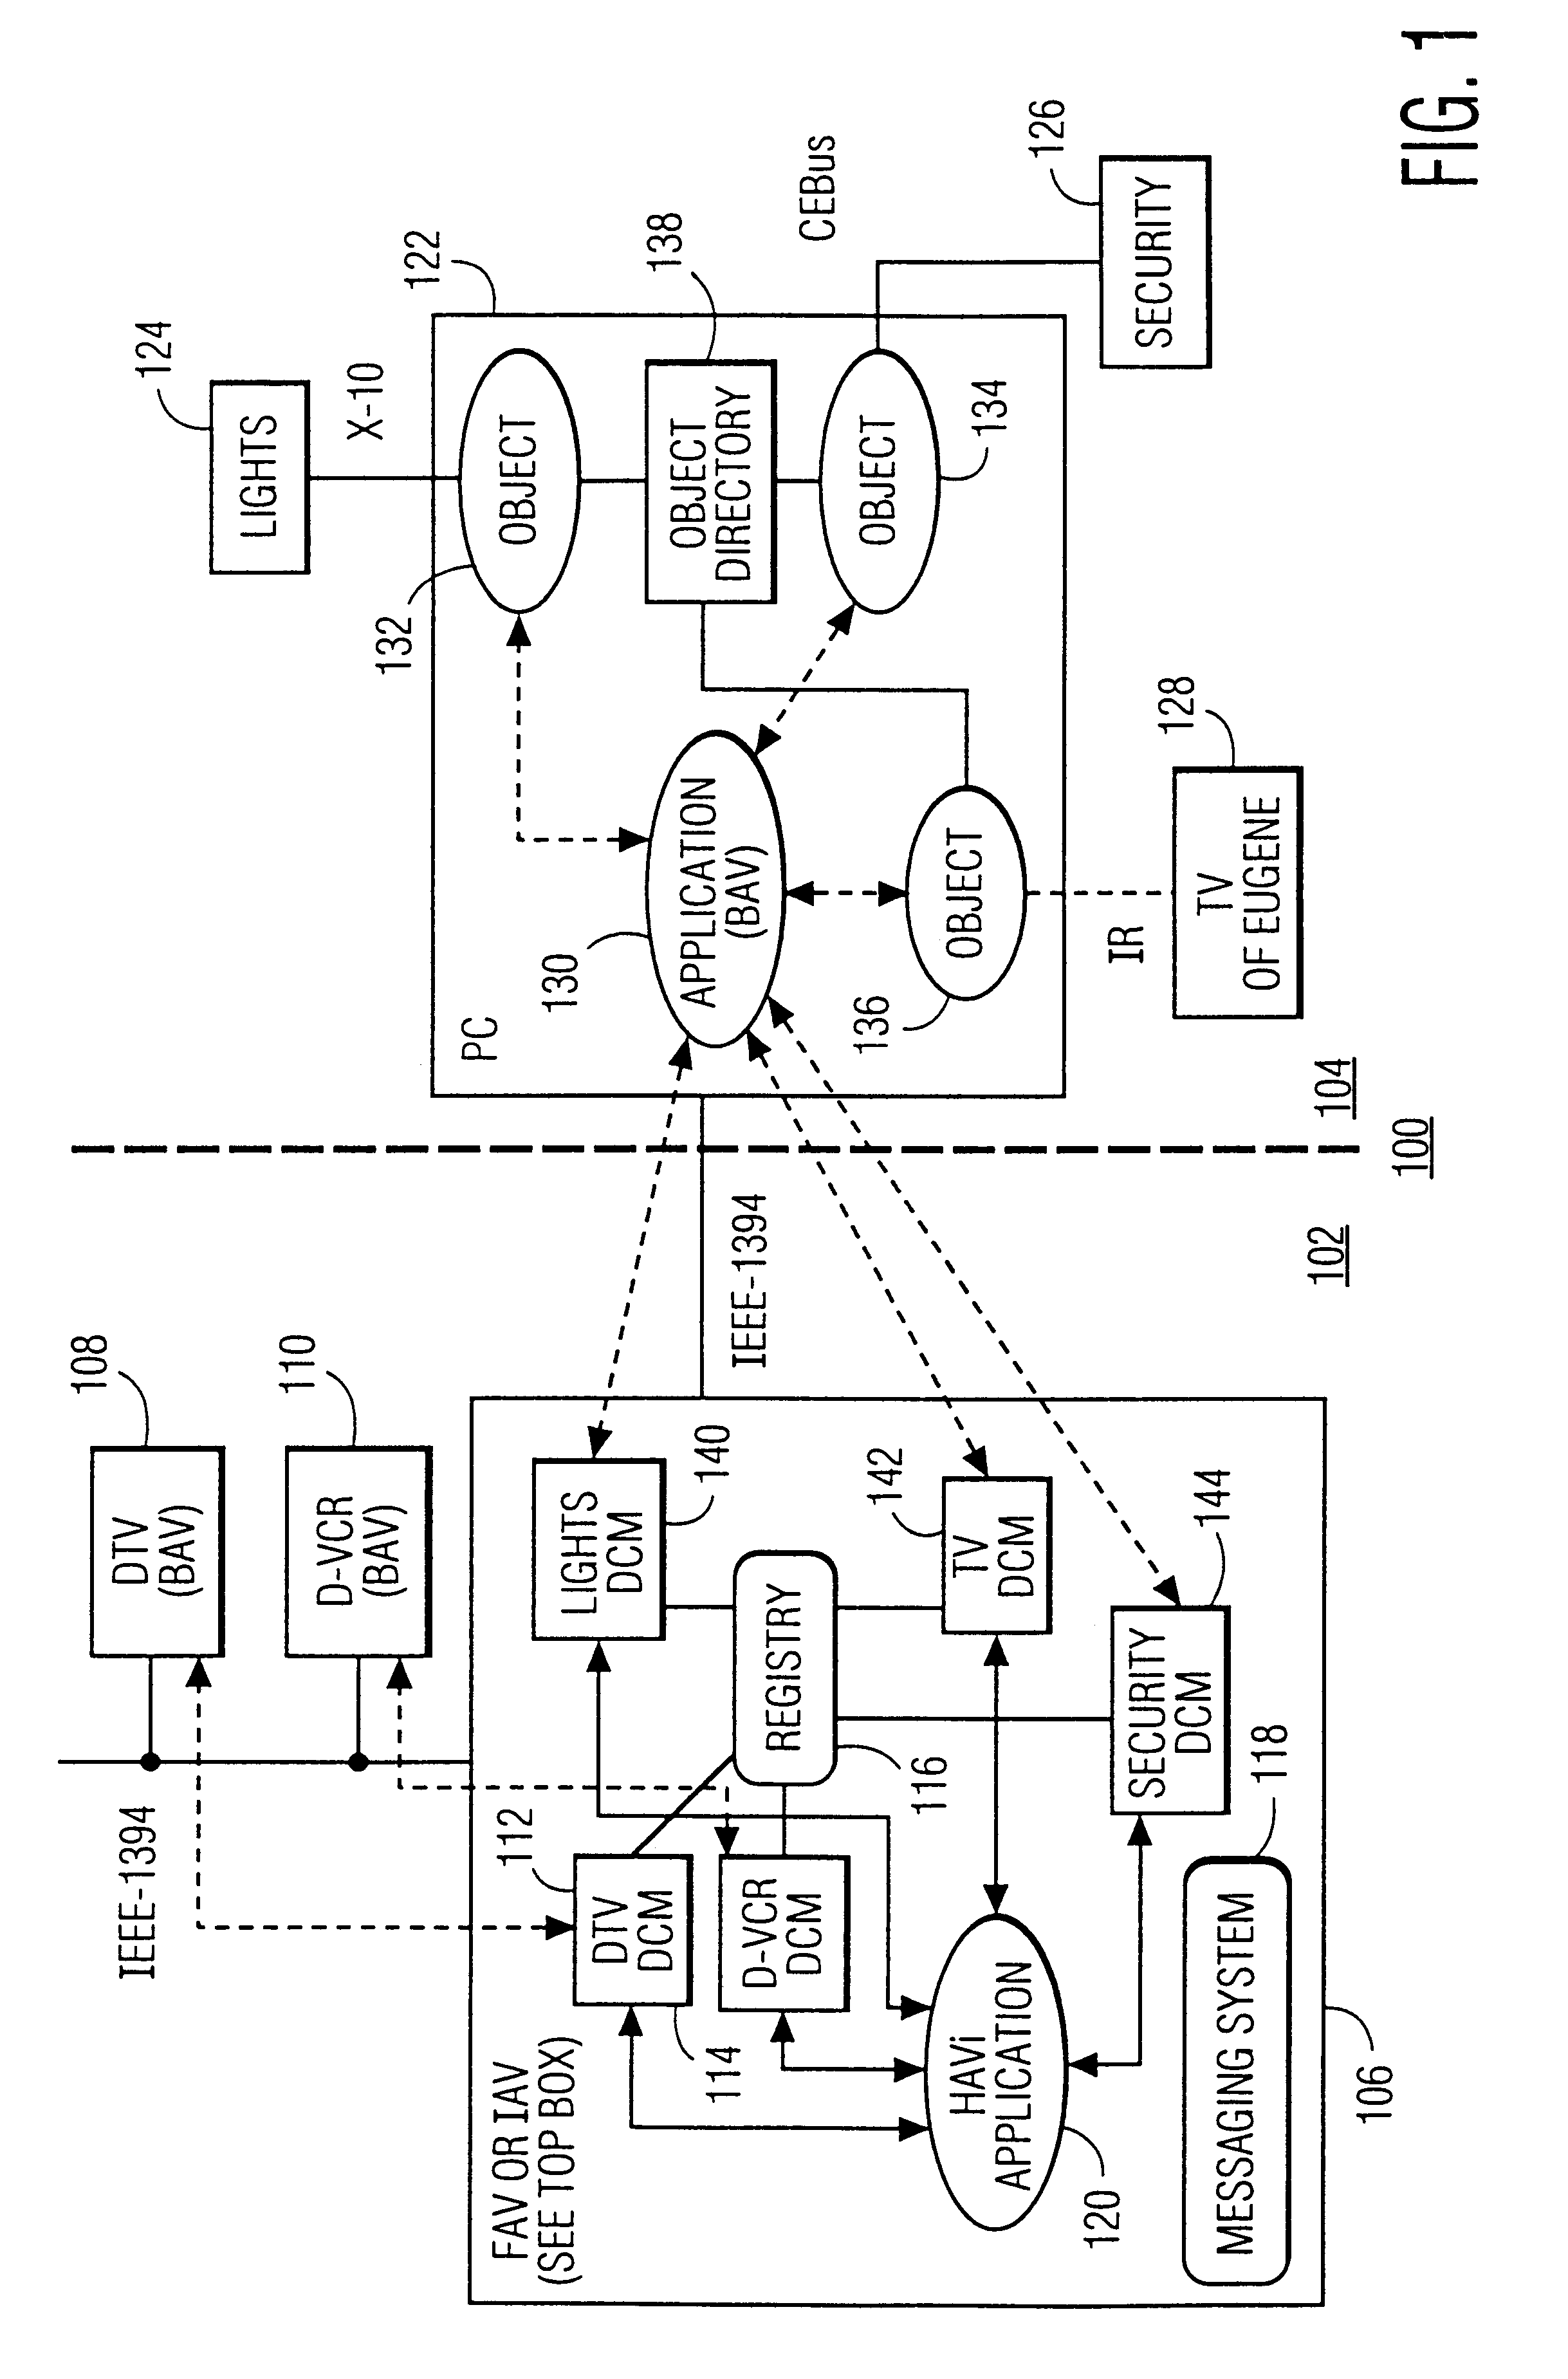 Method and apparatus for a low data-rate network to be represented on and controllable by high data-rate home audio/video interoperability (HAVi) network